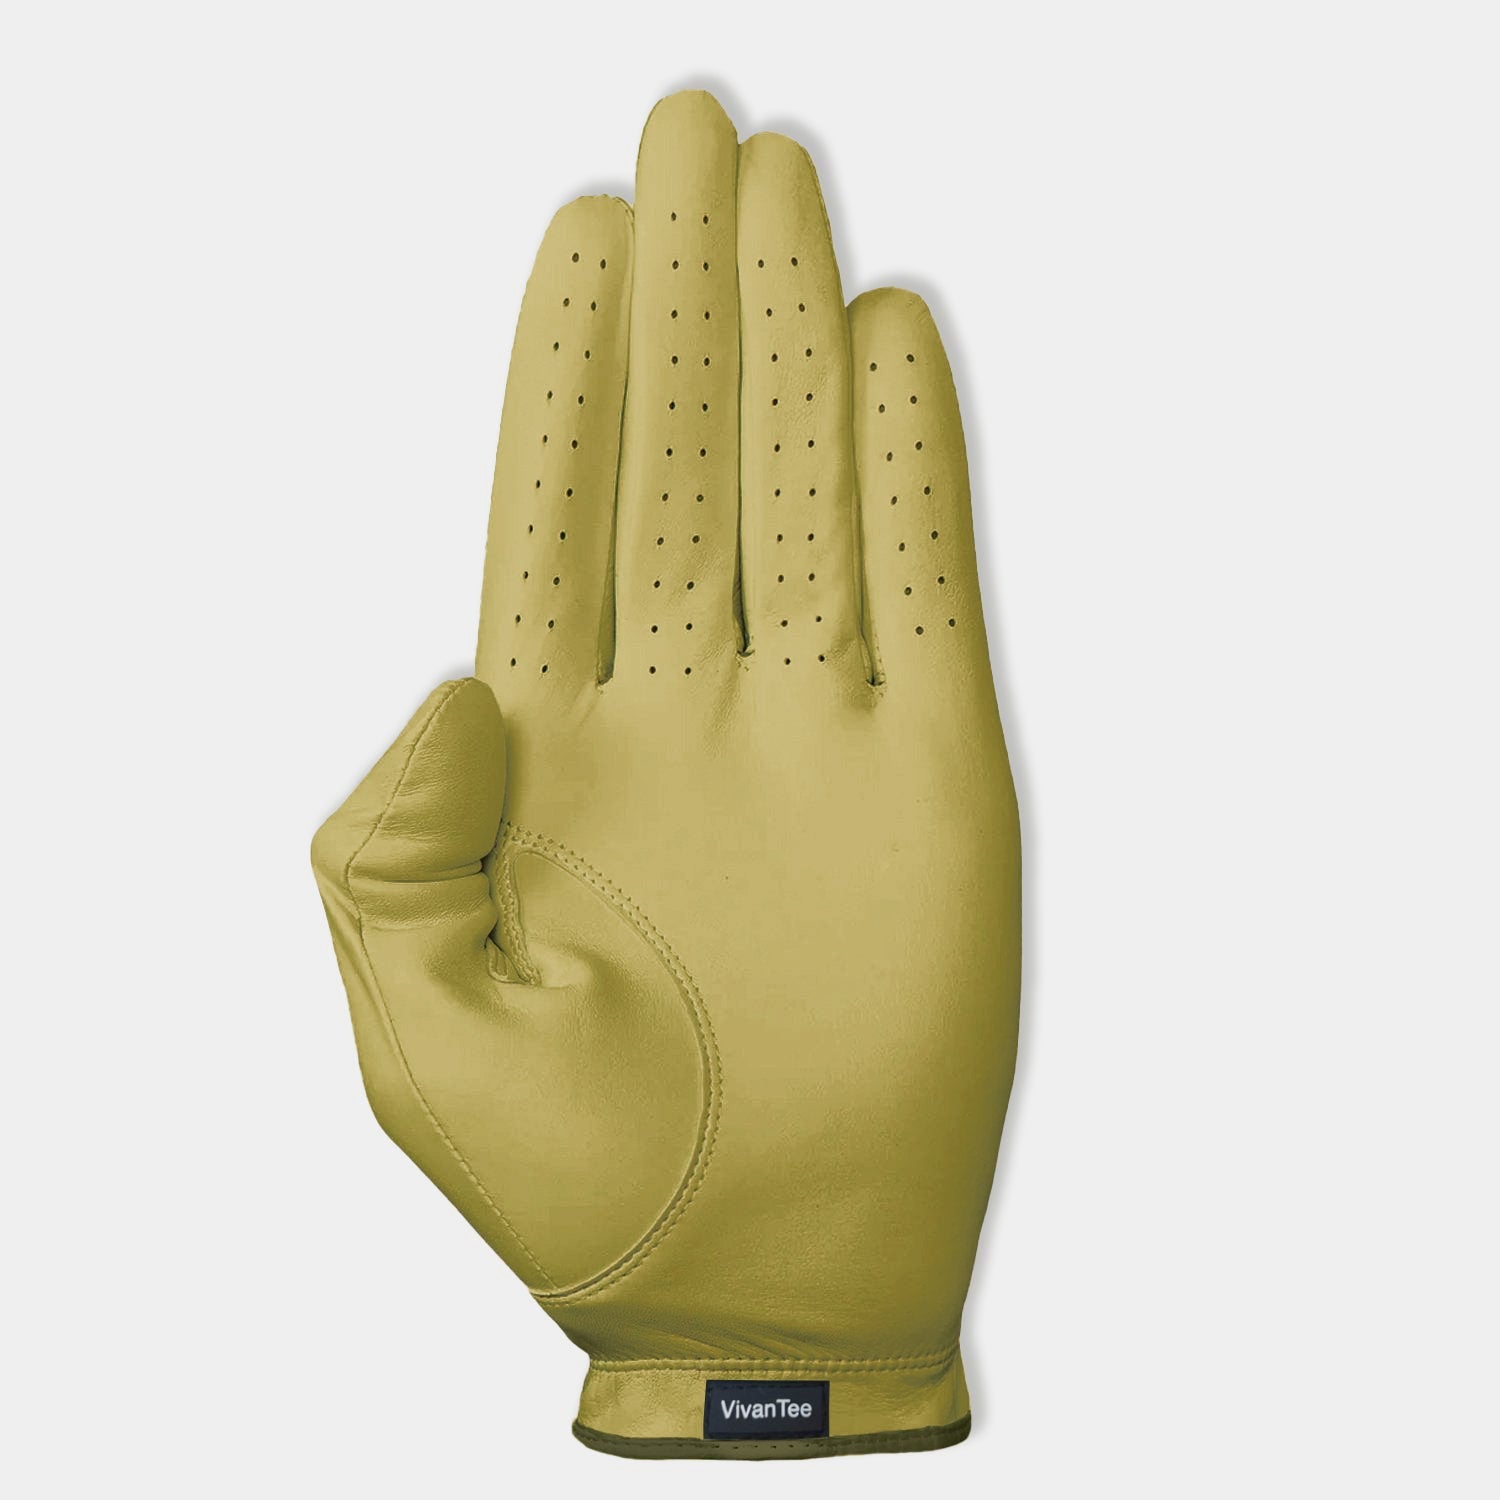 Yellow golf glove for women, showing the palm and VivanTee logo on bottom.